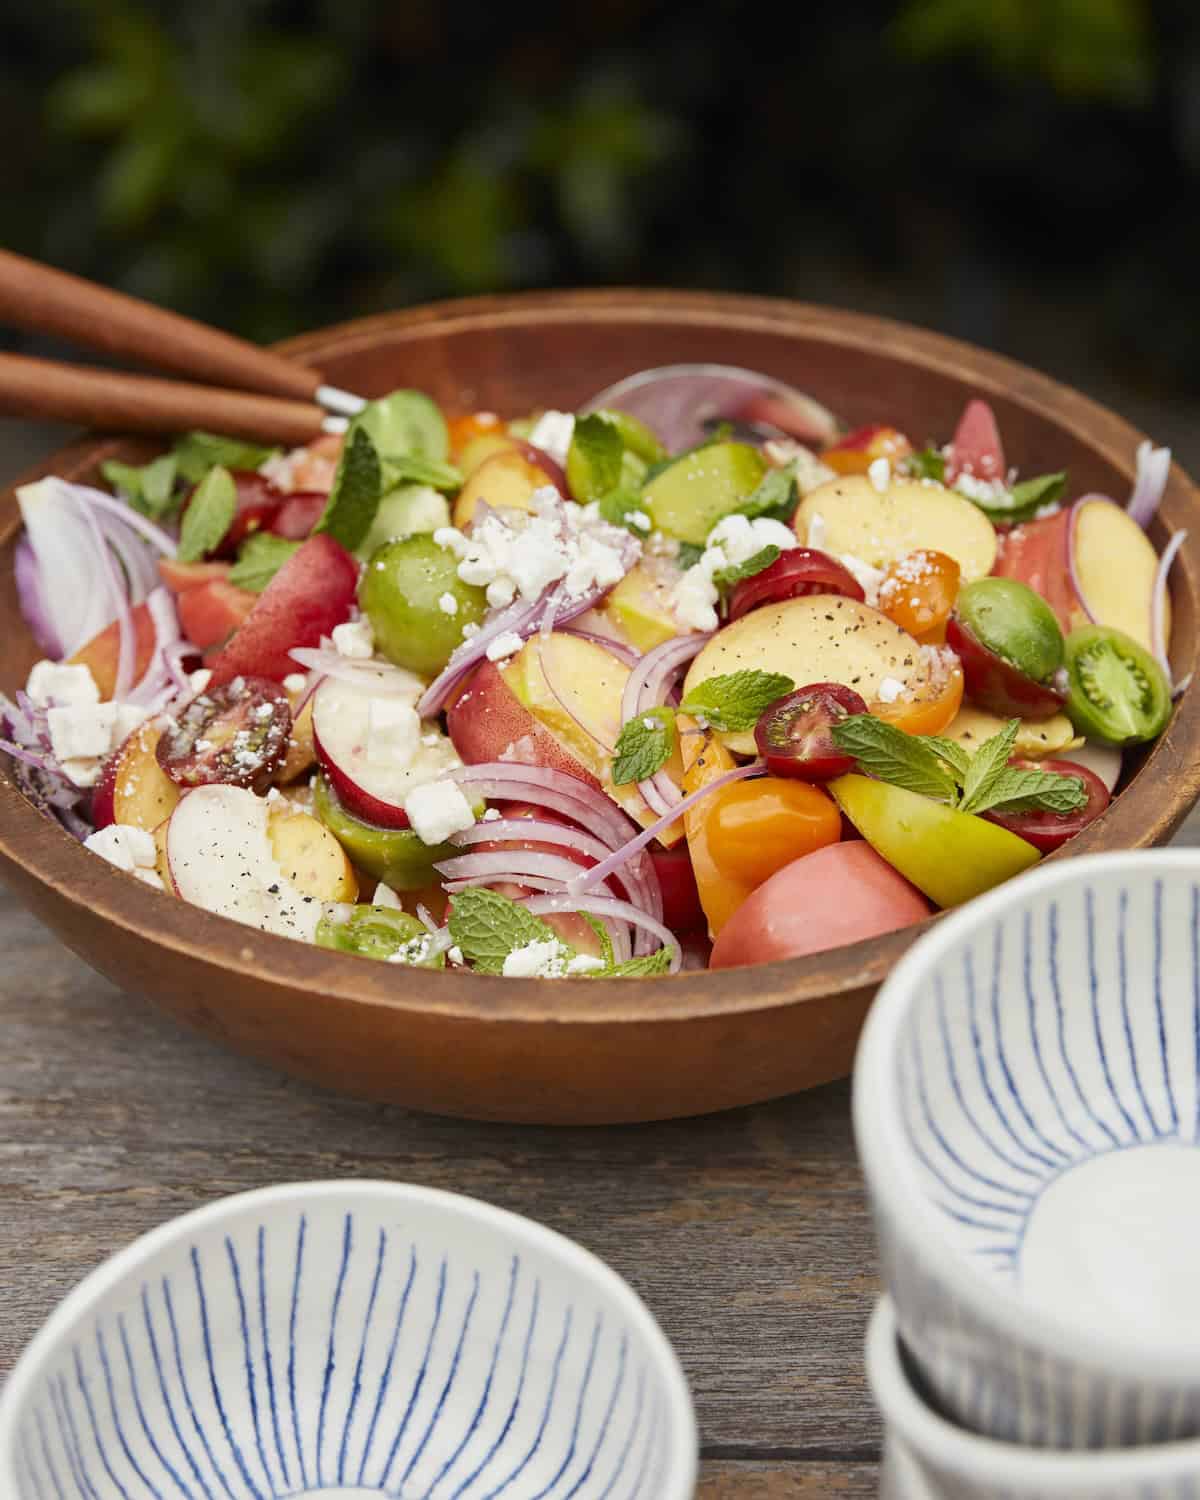 A wooden salad bowl with a stone fruit salad, salad servers and a few bowls on the side for serving.